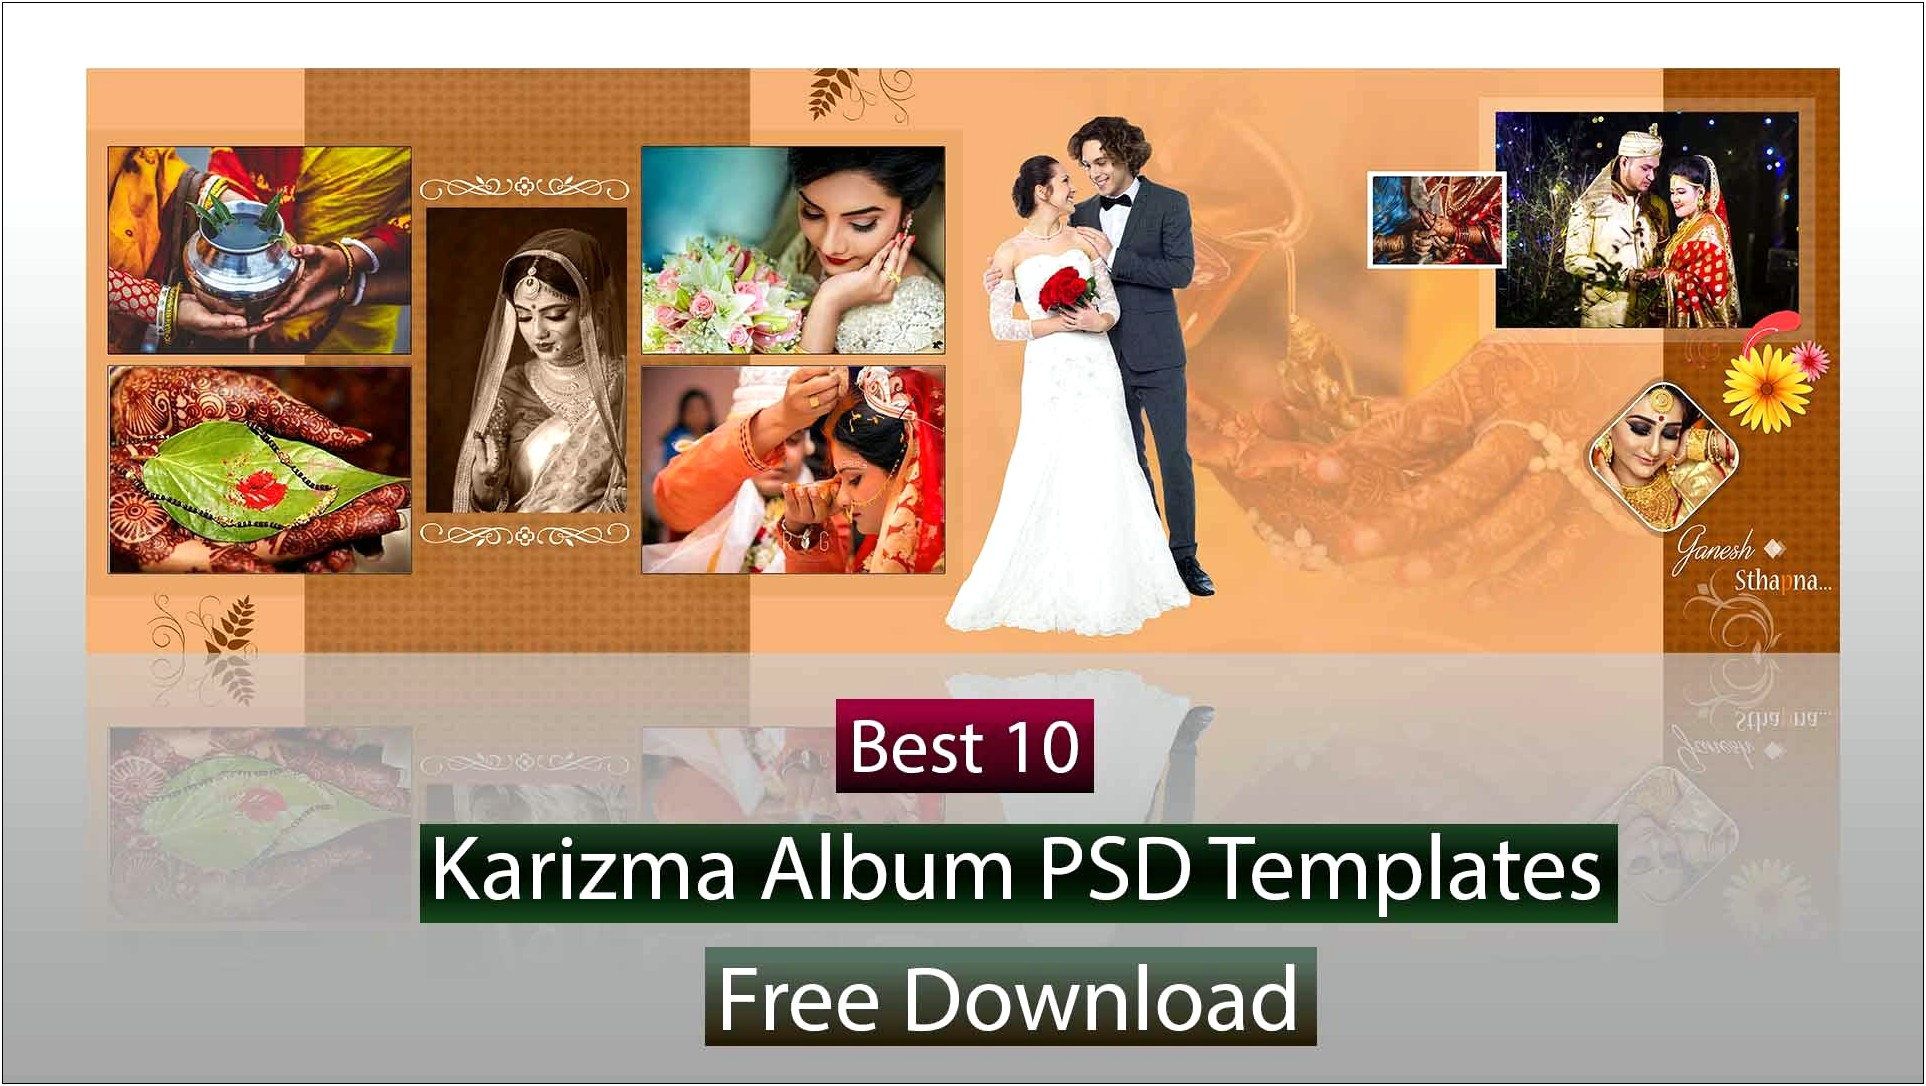 Free Download Psd Templates For Wedding Album